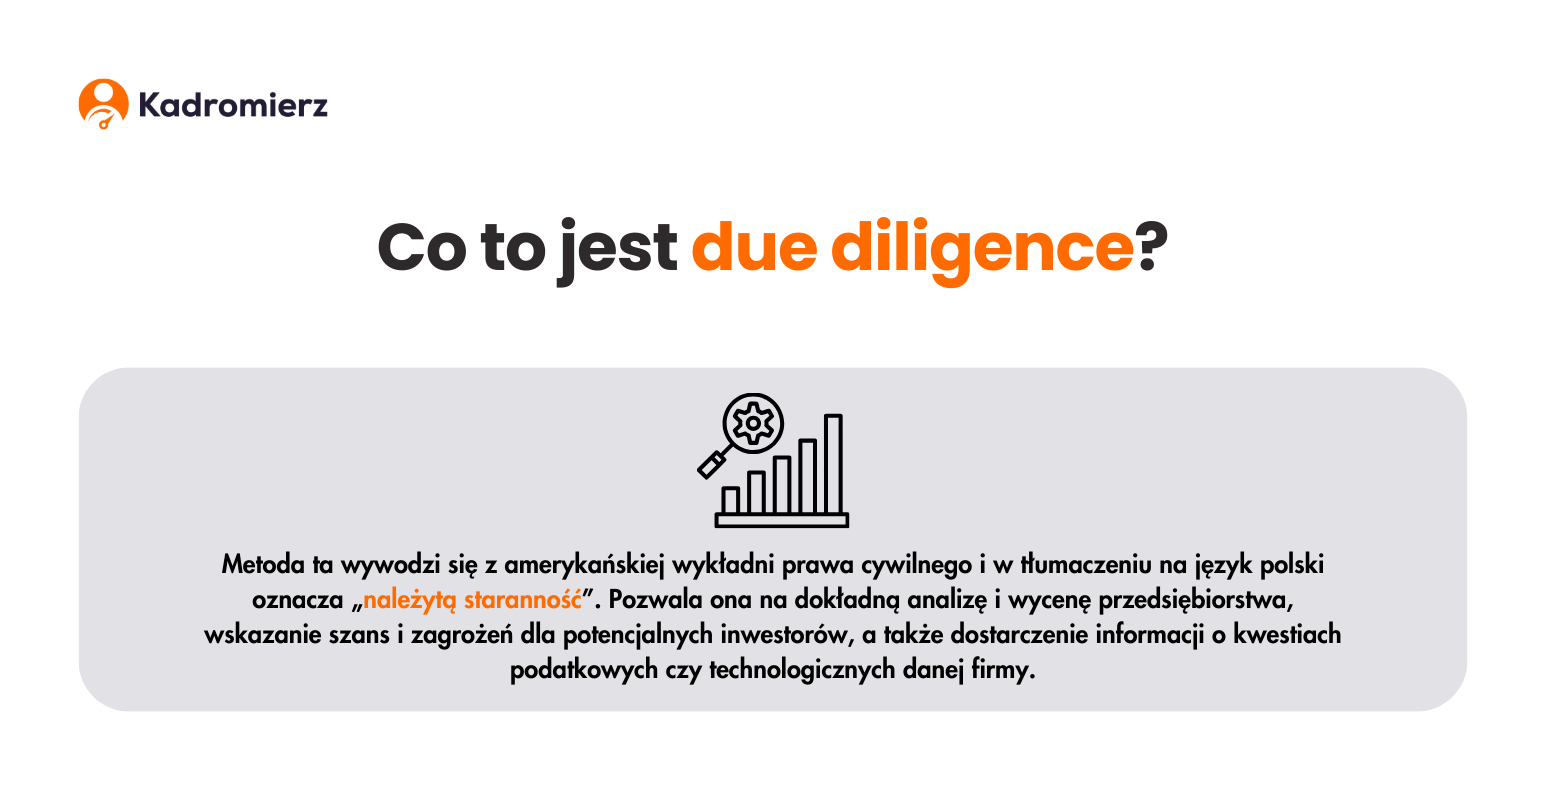 Co to jest due diligence?